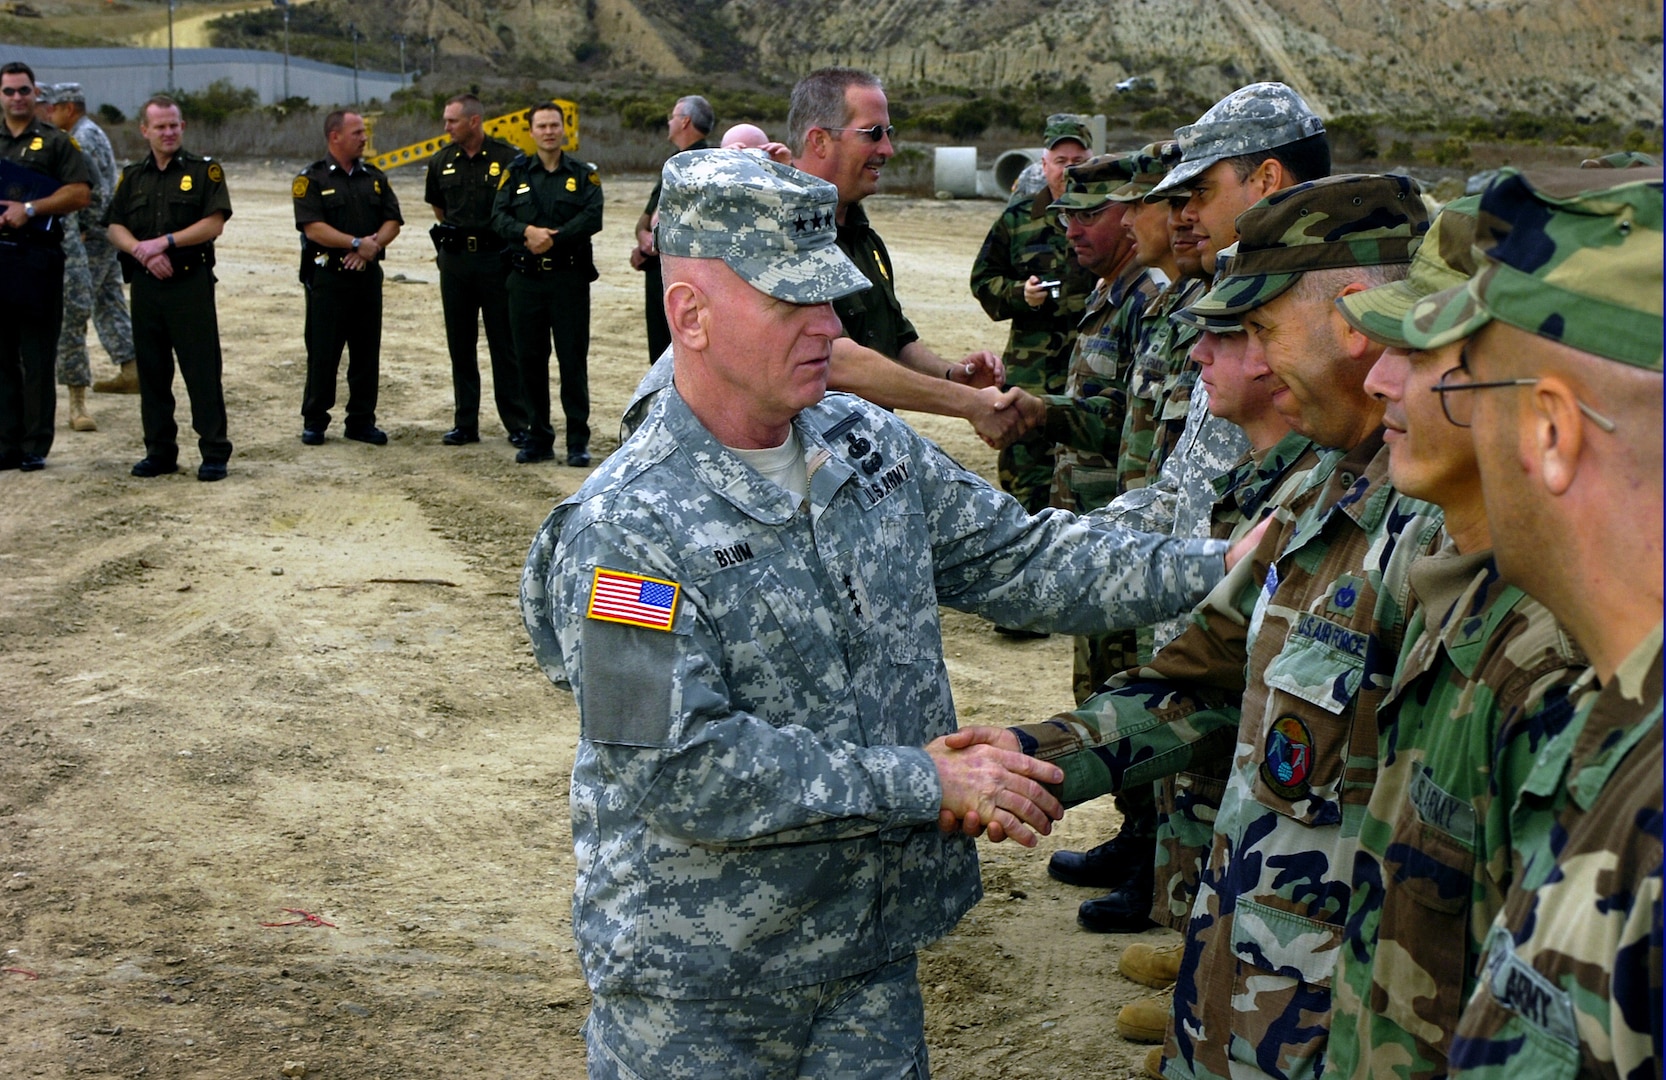 Lt. Gen. H Steven Blum, chief, National Guard Bureau, meets with citizen-soldiers and airmen and with Border Patrol agents at the U.S. border with Mexico near San Diego, Calif., on Nov. 27, 2006, during a visit to troops participating in Operation Jump Start. Up to 6,000 National Guard members are helping the Border Patrol secure the nation's southern border.